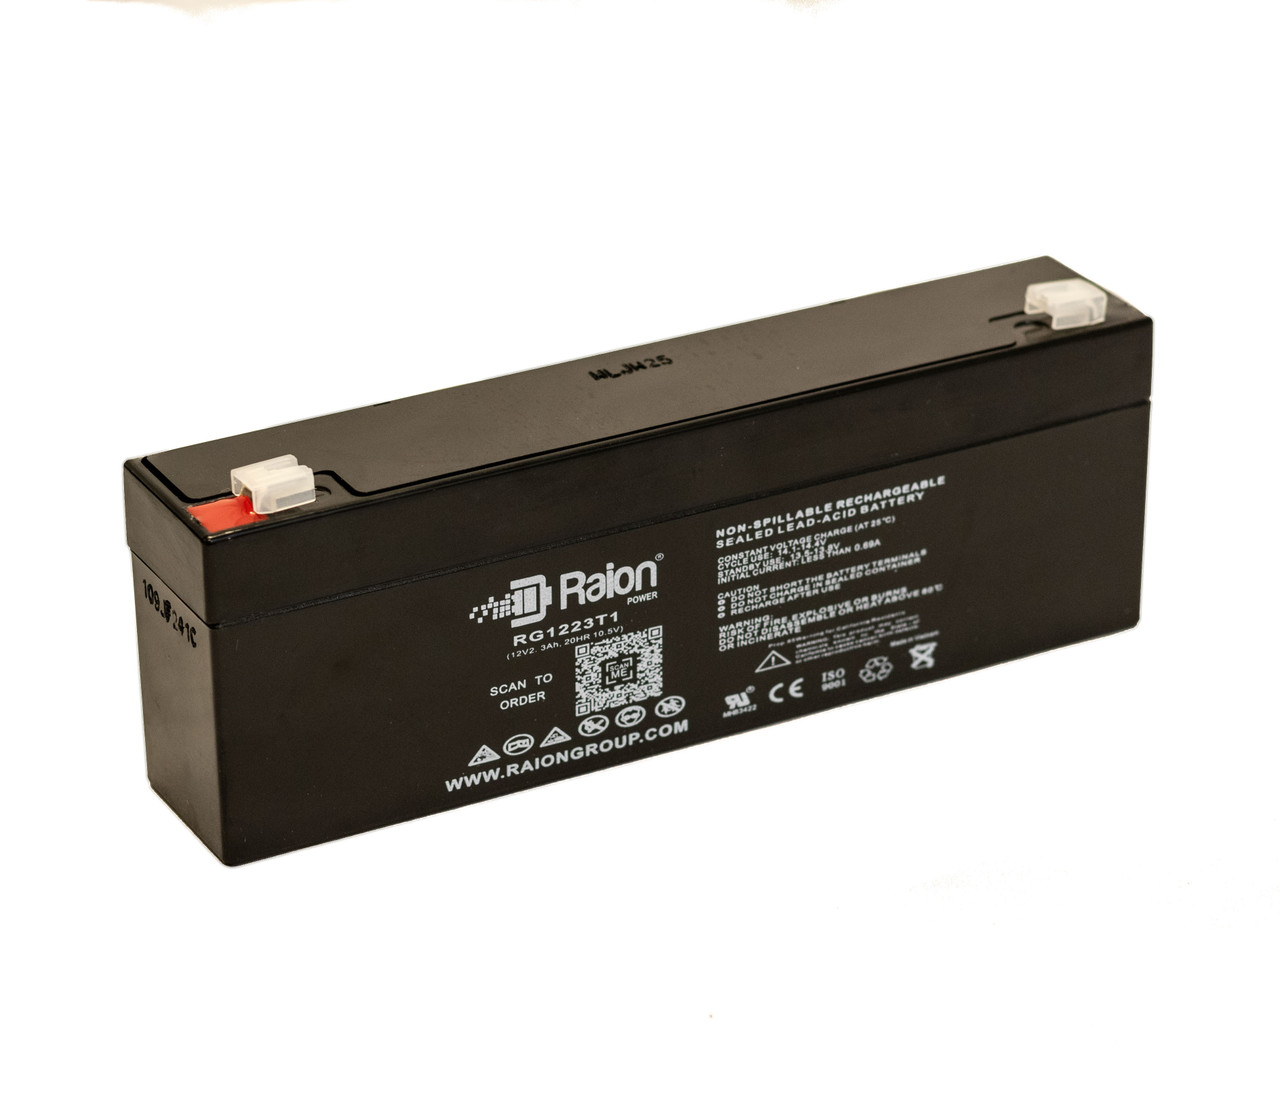 Raion Power RG1223T1 Replacement Battery for SigmasTek SP12-2.3